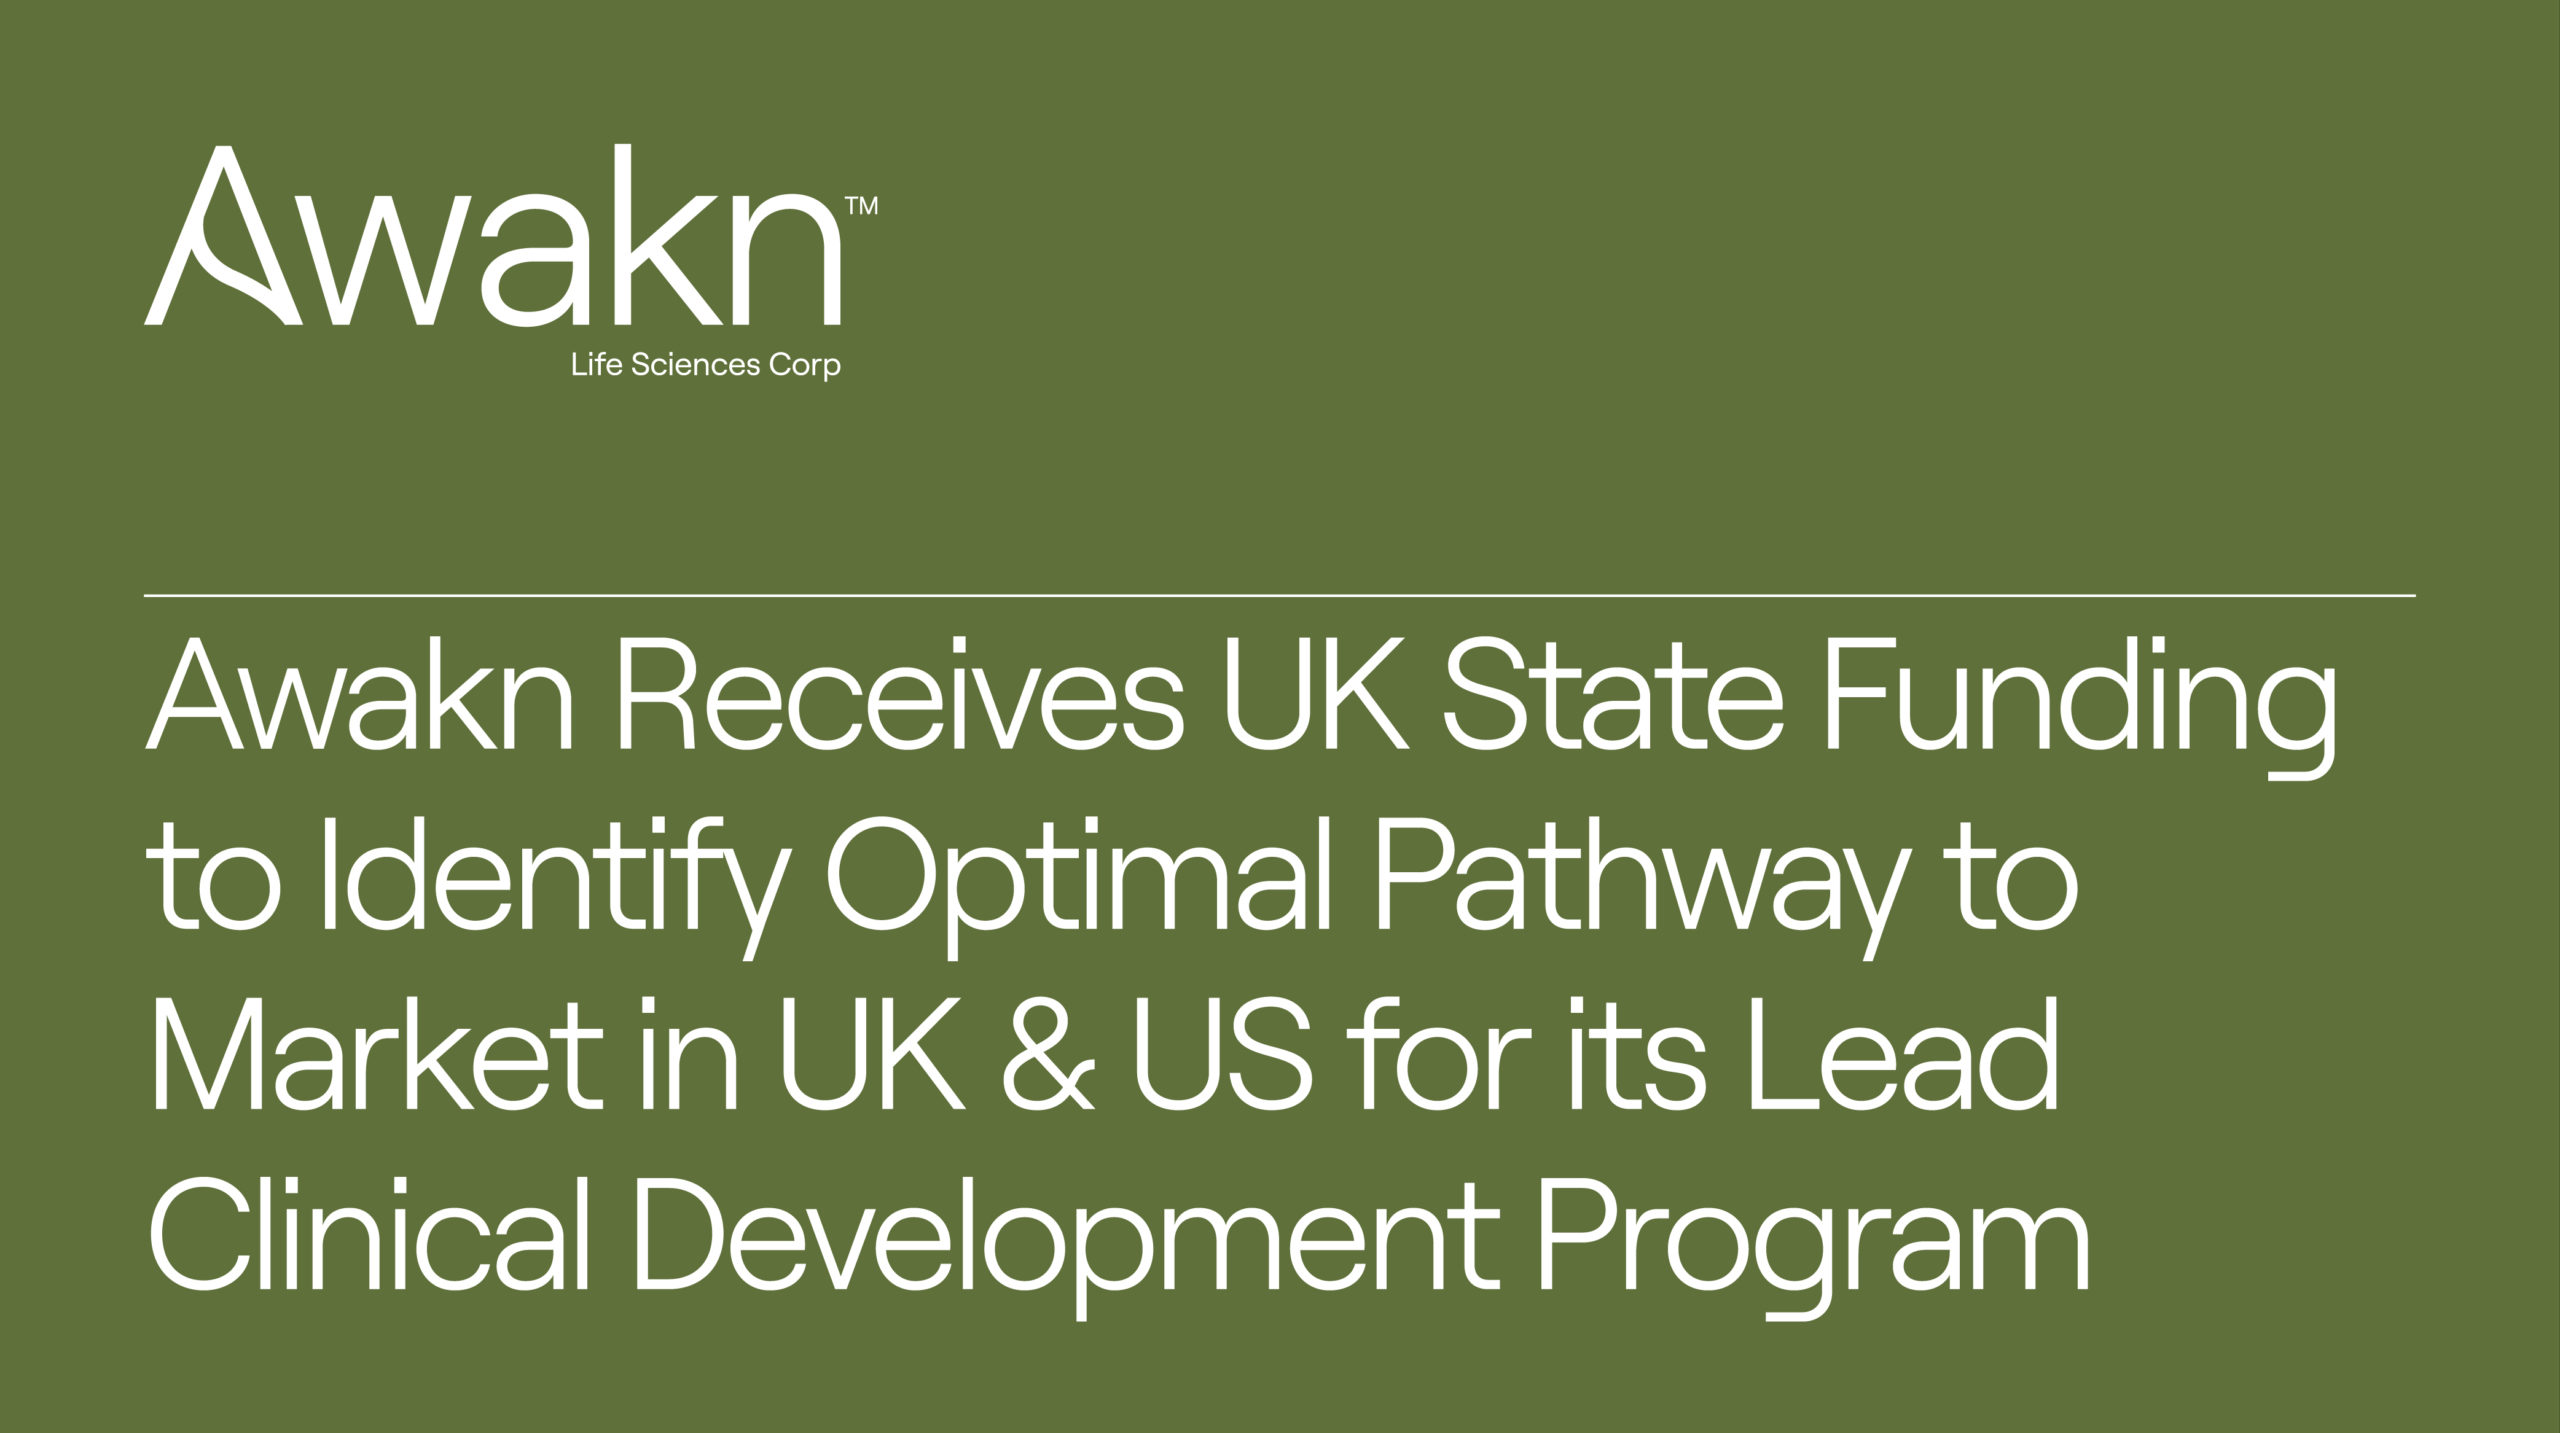 Awakn Receives UK State Funding to Identify Optimal Pathway to Market In UK & US For Its Lead Clinical Development Program